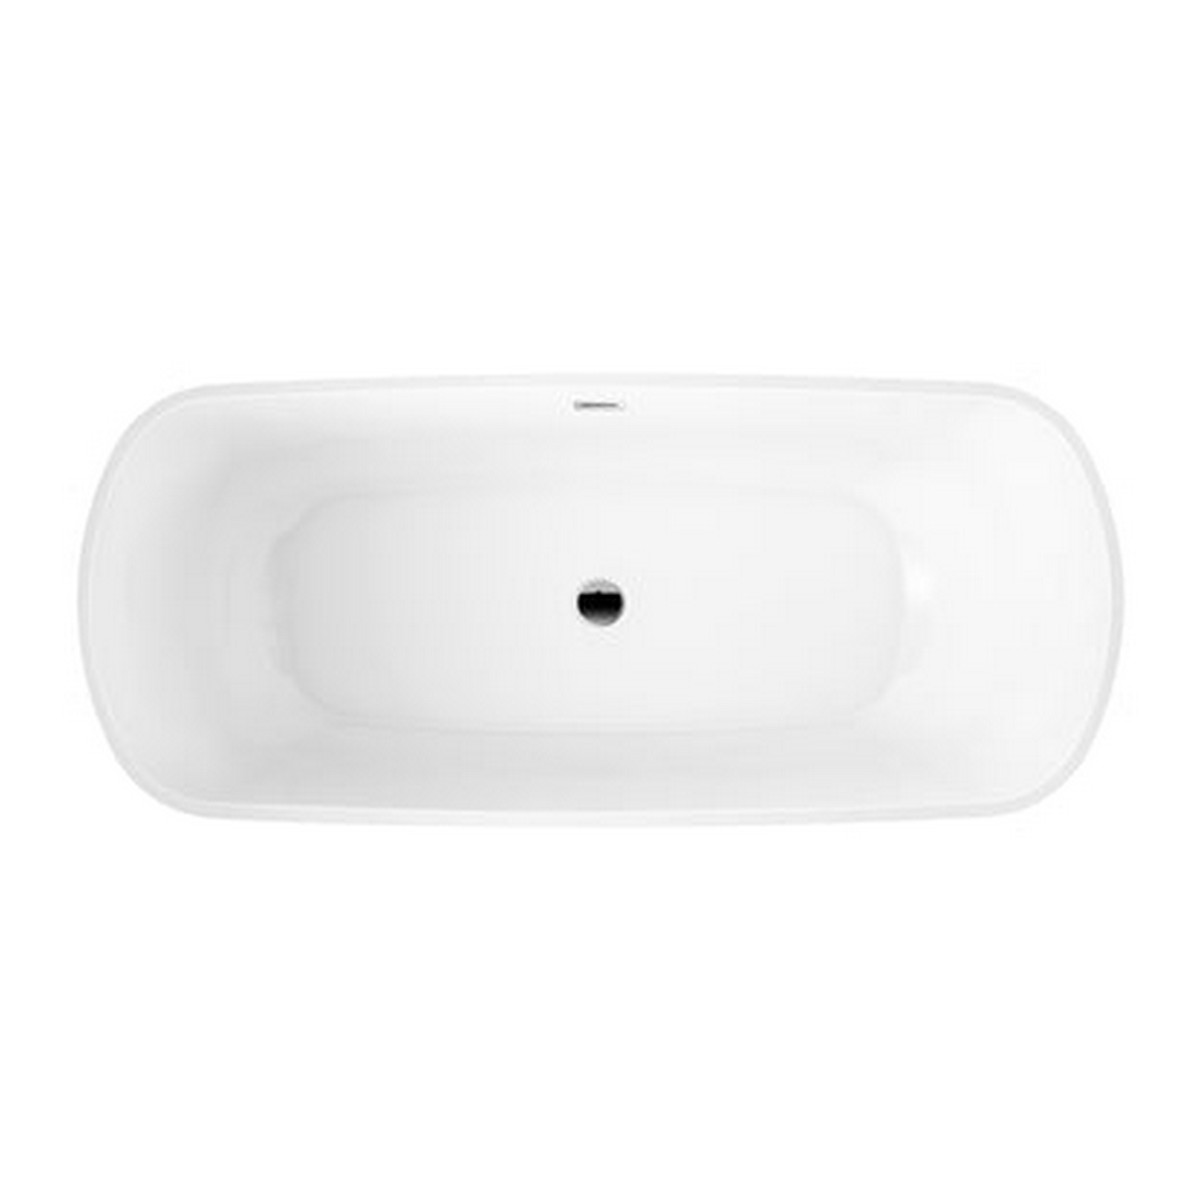 BARCLAY ATDN67IG CELESTE 66 3/4 INCH ACRYLIC FREESTANDING OVAL SOAKING BATHTUB IN WHITE WITH INTEGRAL DRAIN AND OVERFLOW